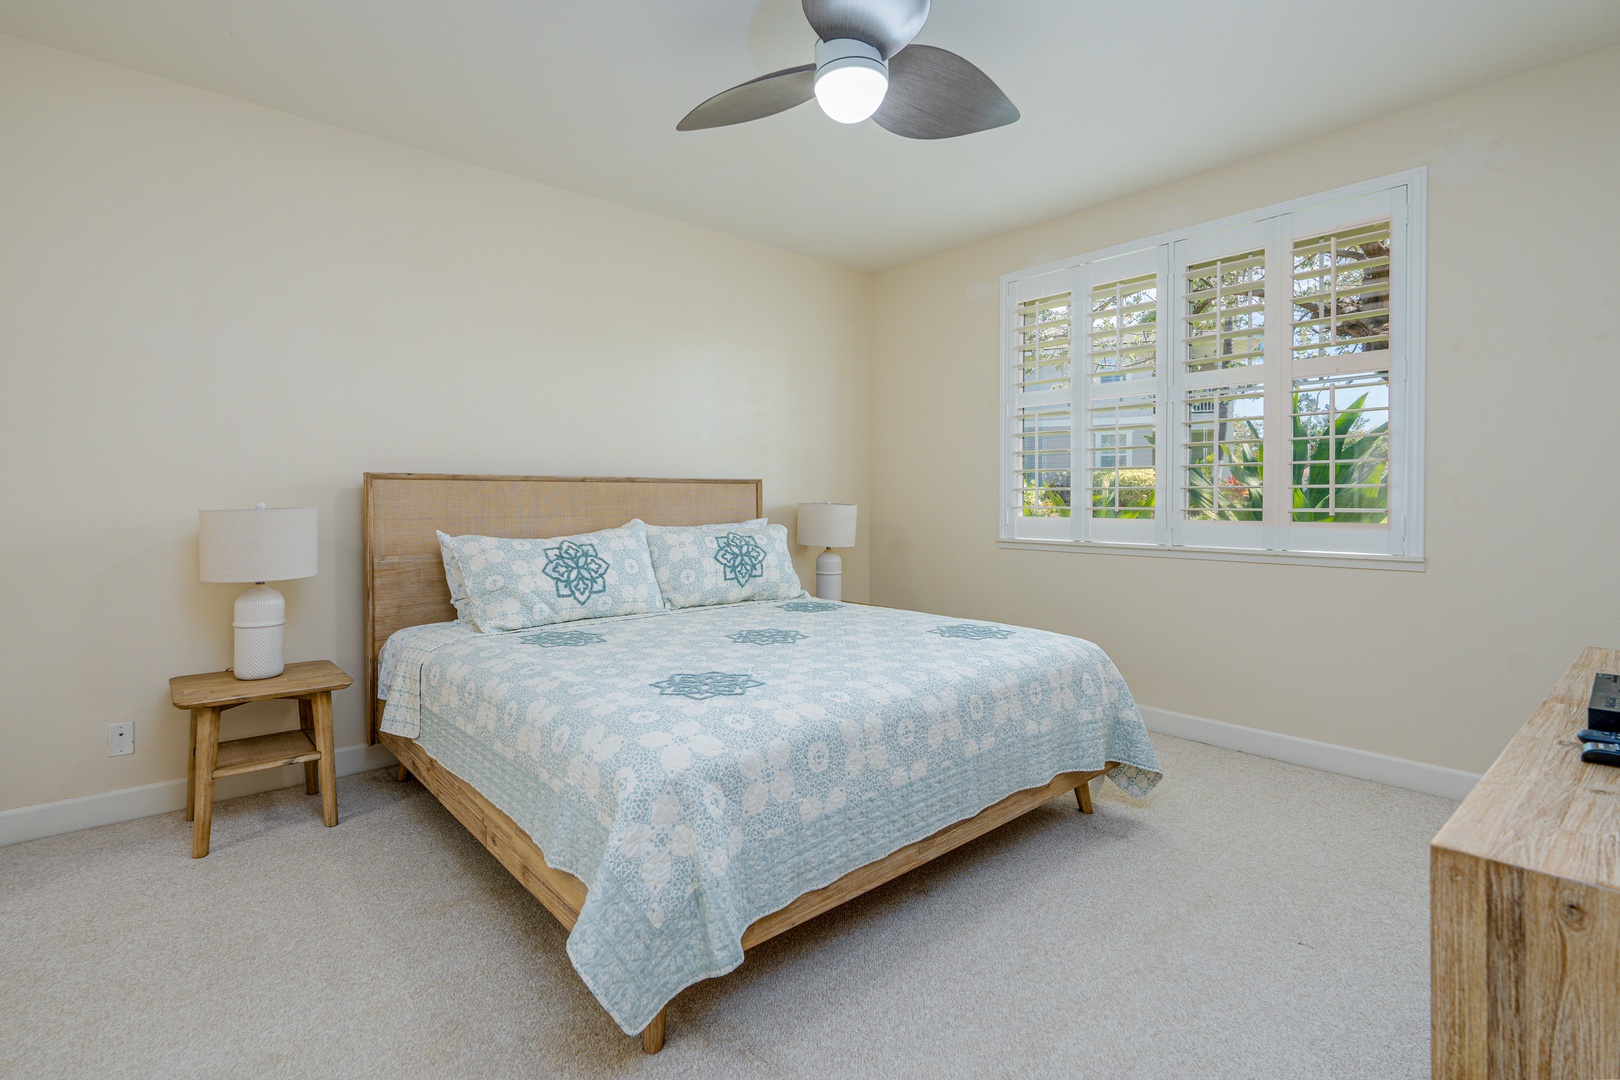 Kapolei Vacation Rentals, Ko Olina Kai 1105F - Equipped with a king bed for a restful sleep.